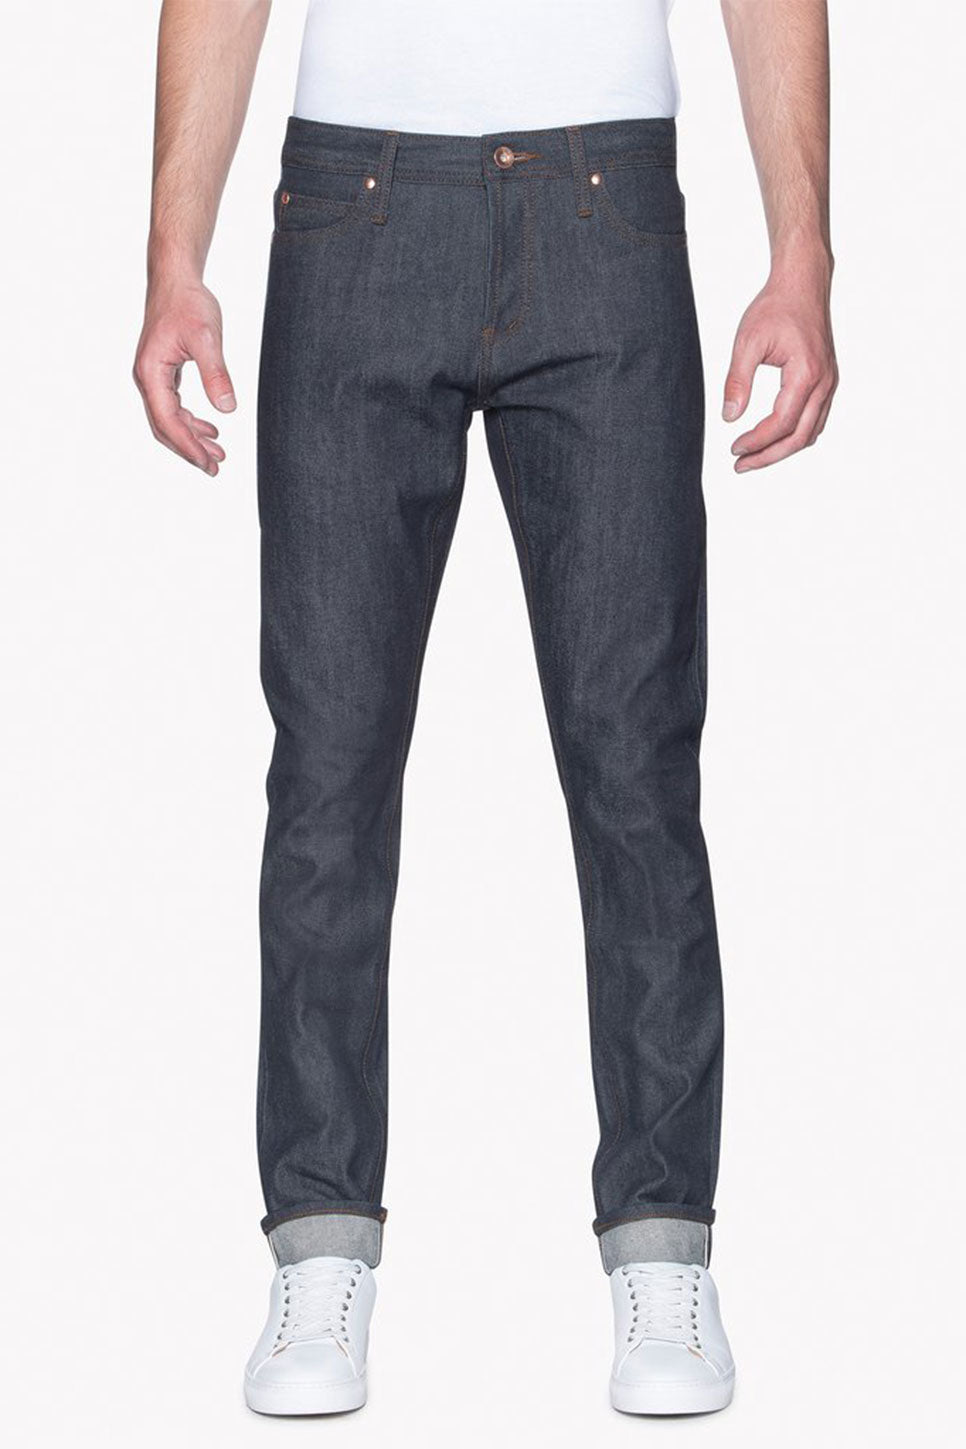 Unbranded - UB401 Tight Selvedge - Front